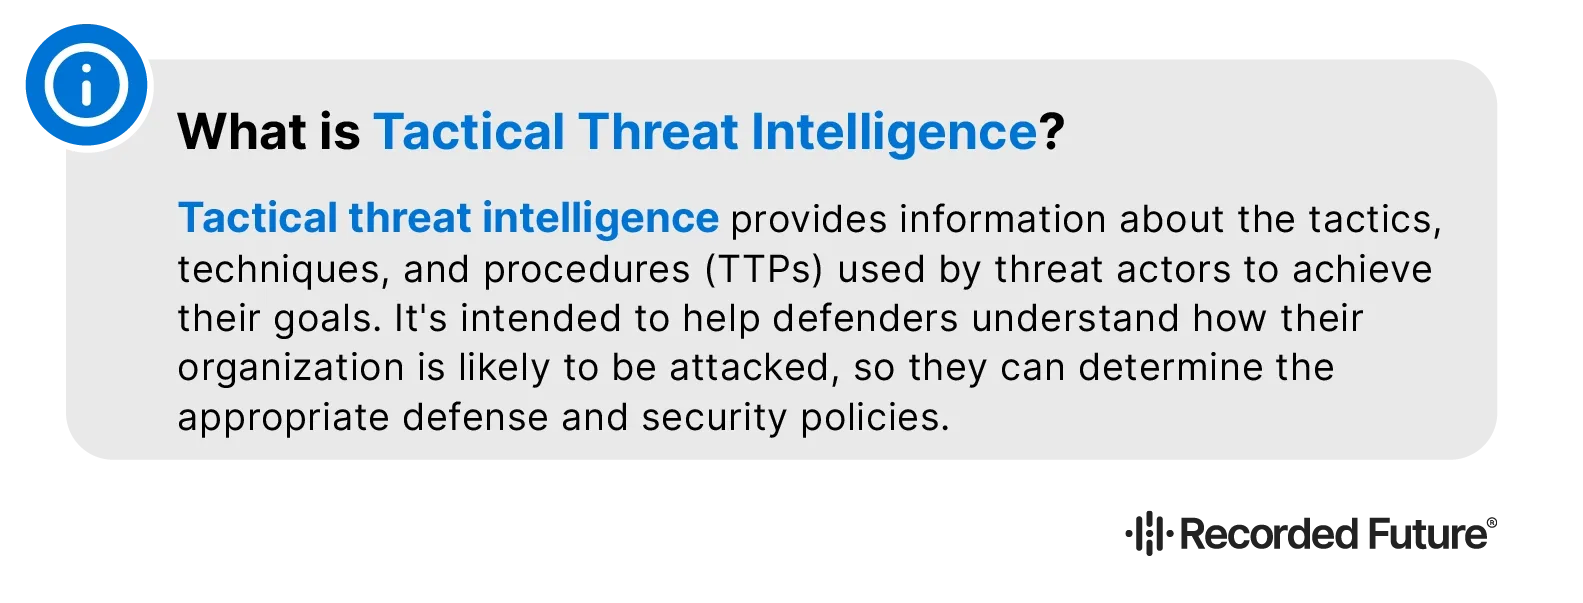 What is Tactical Threat Intelligence?